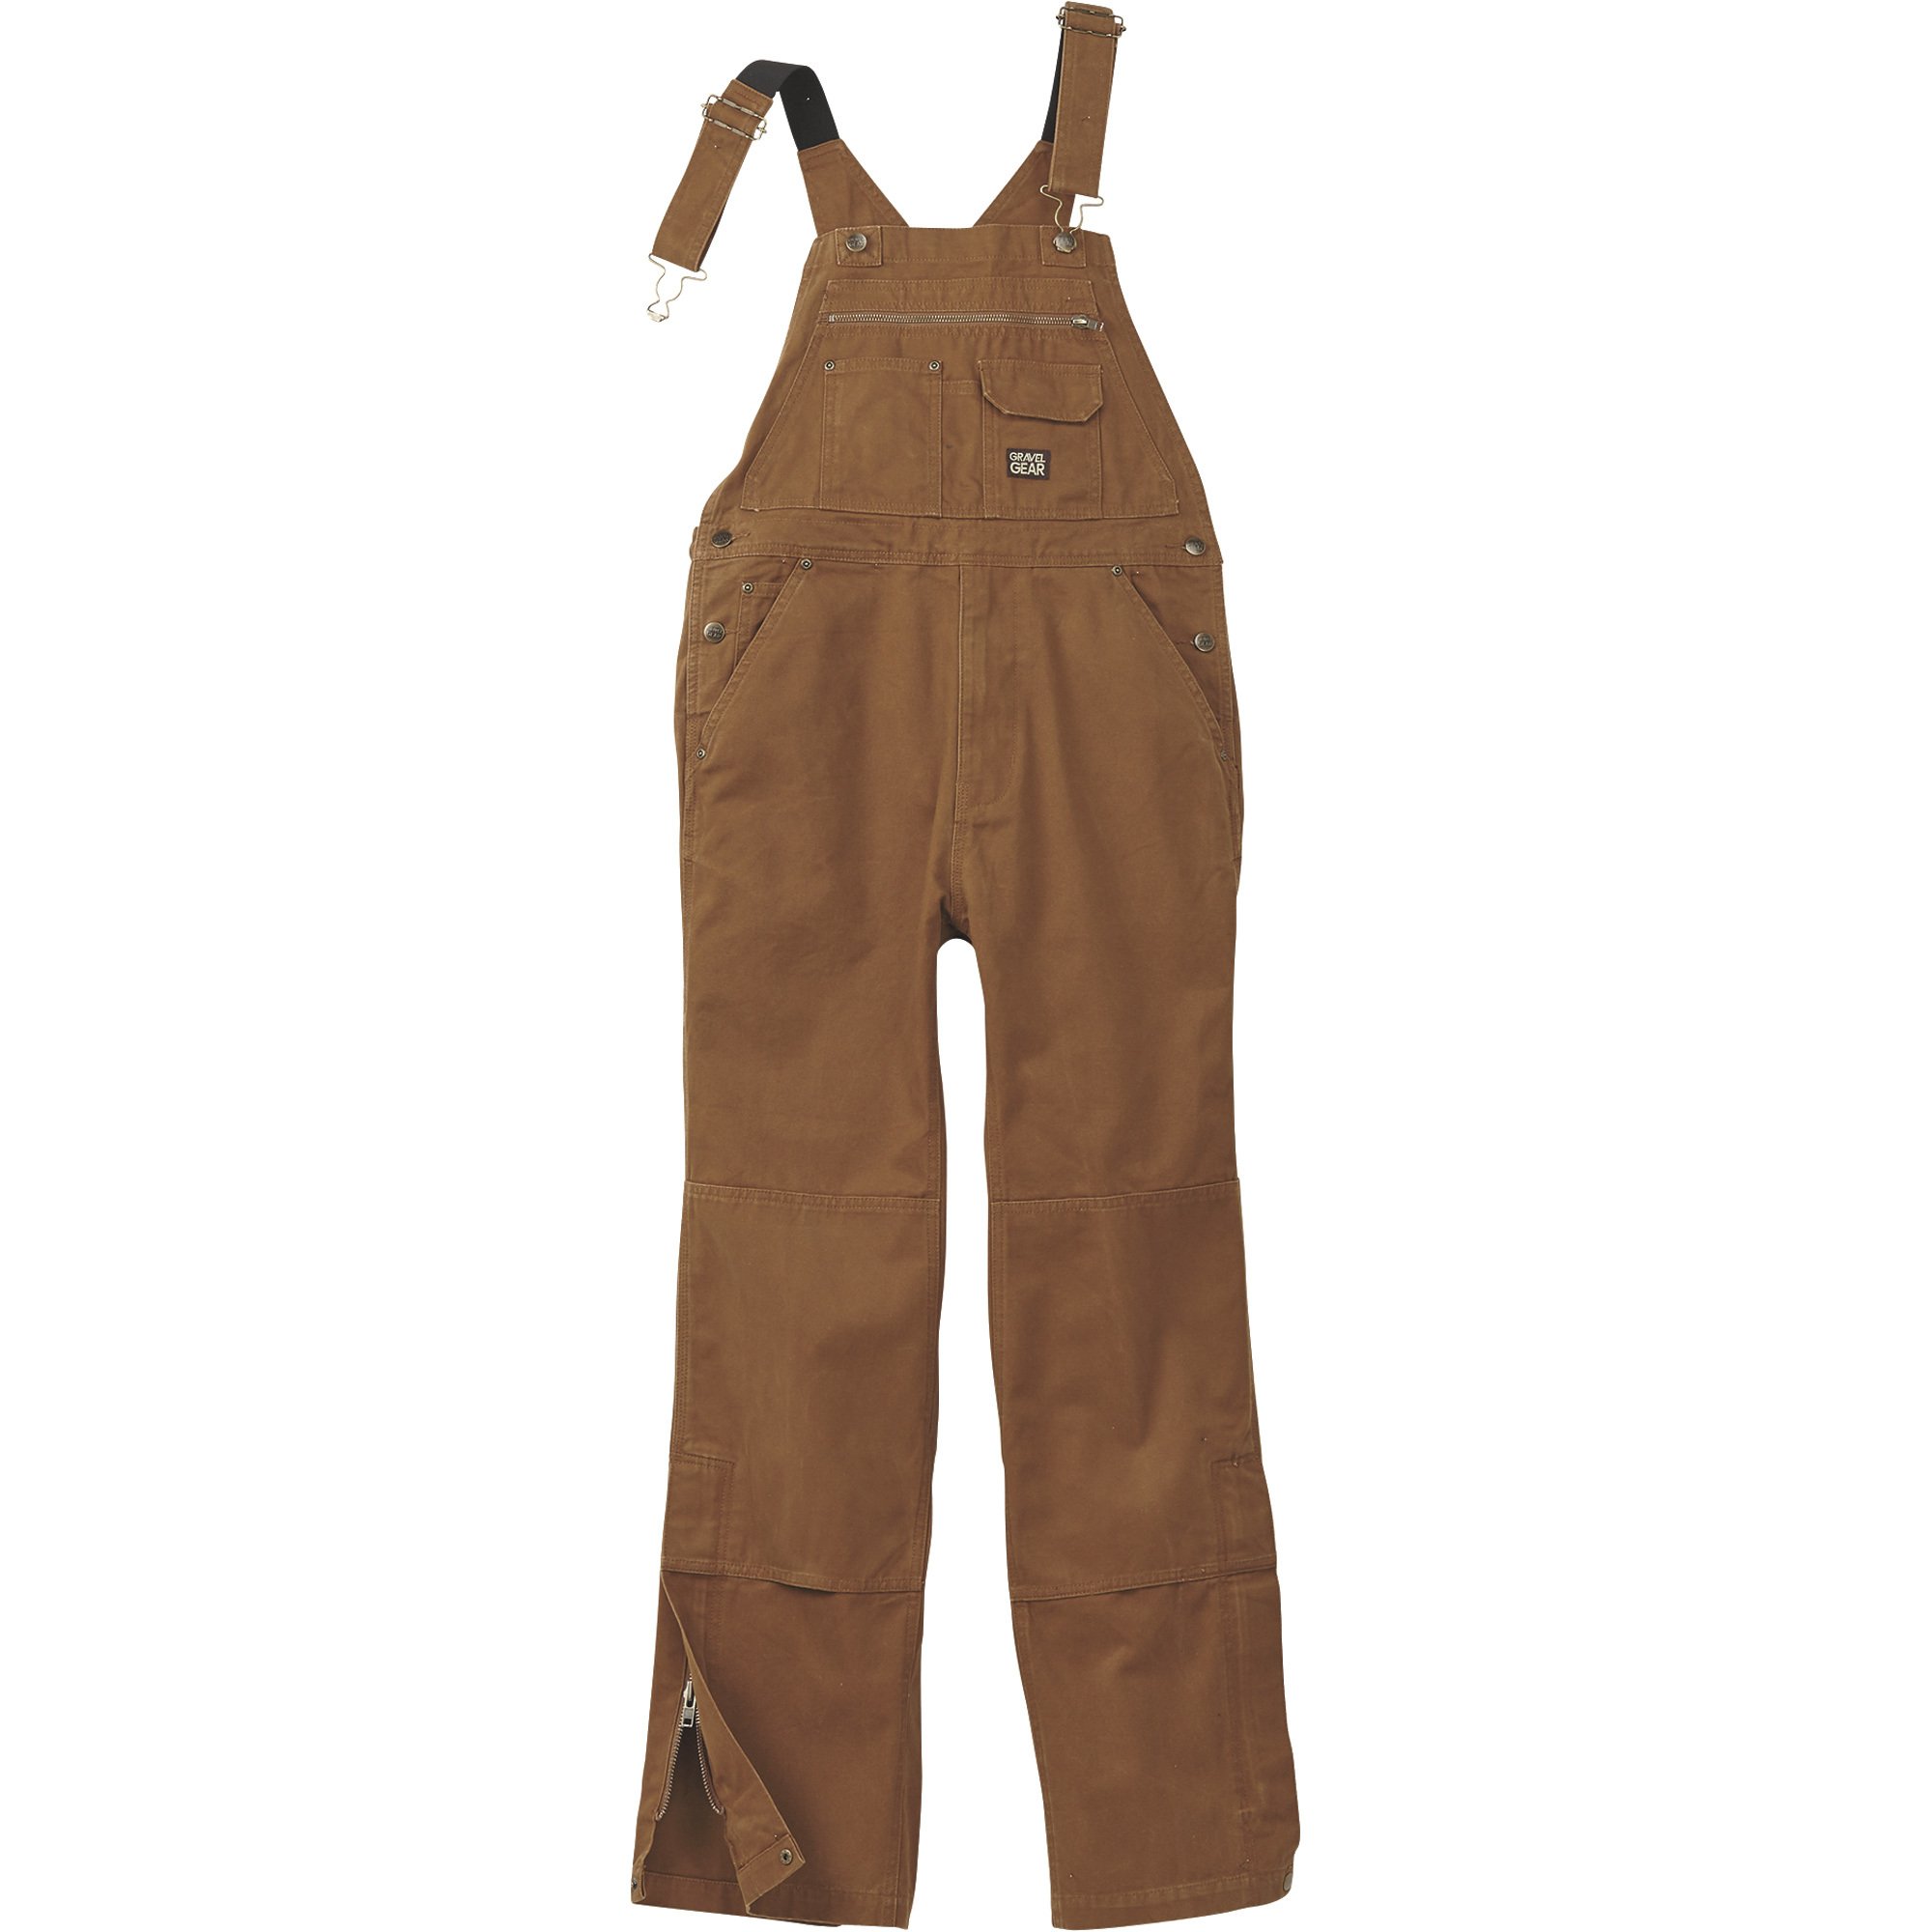 Gravel Gear Men's Unlined 12-oz. Duck Overalls with Teflon Fabric ...